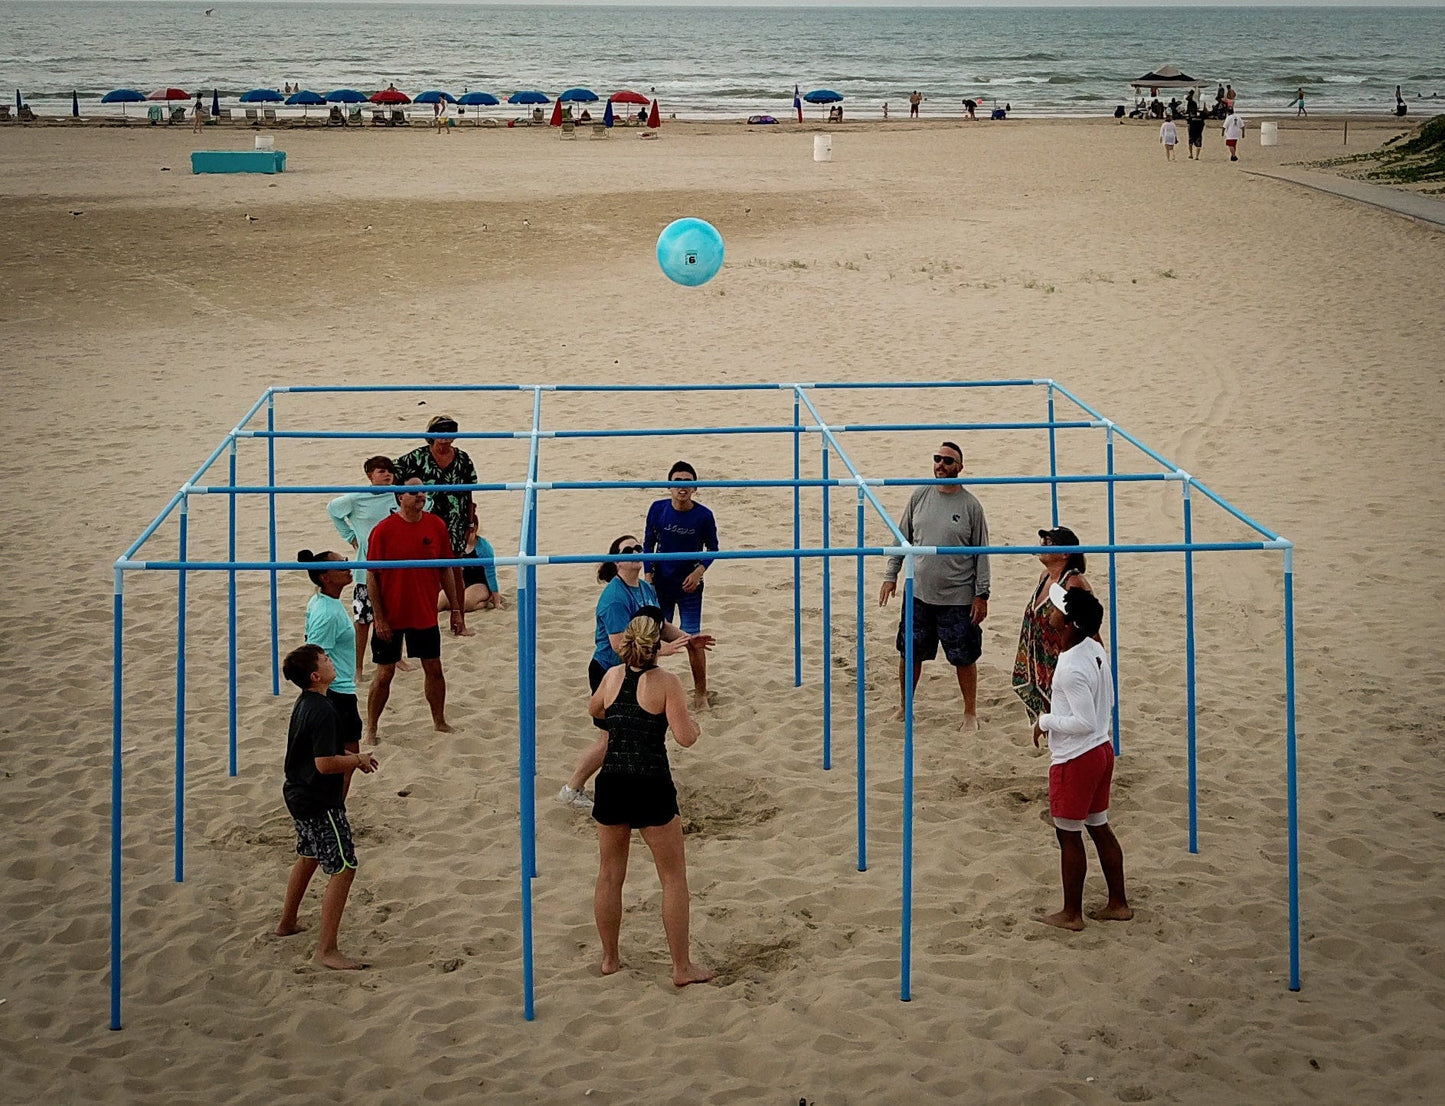 9 Square in the Air Deluxe Game on the beach